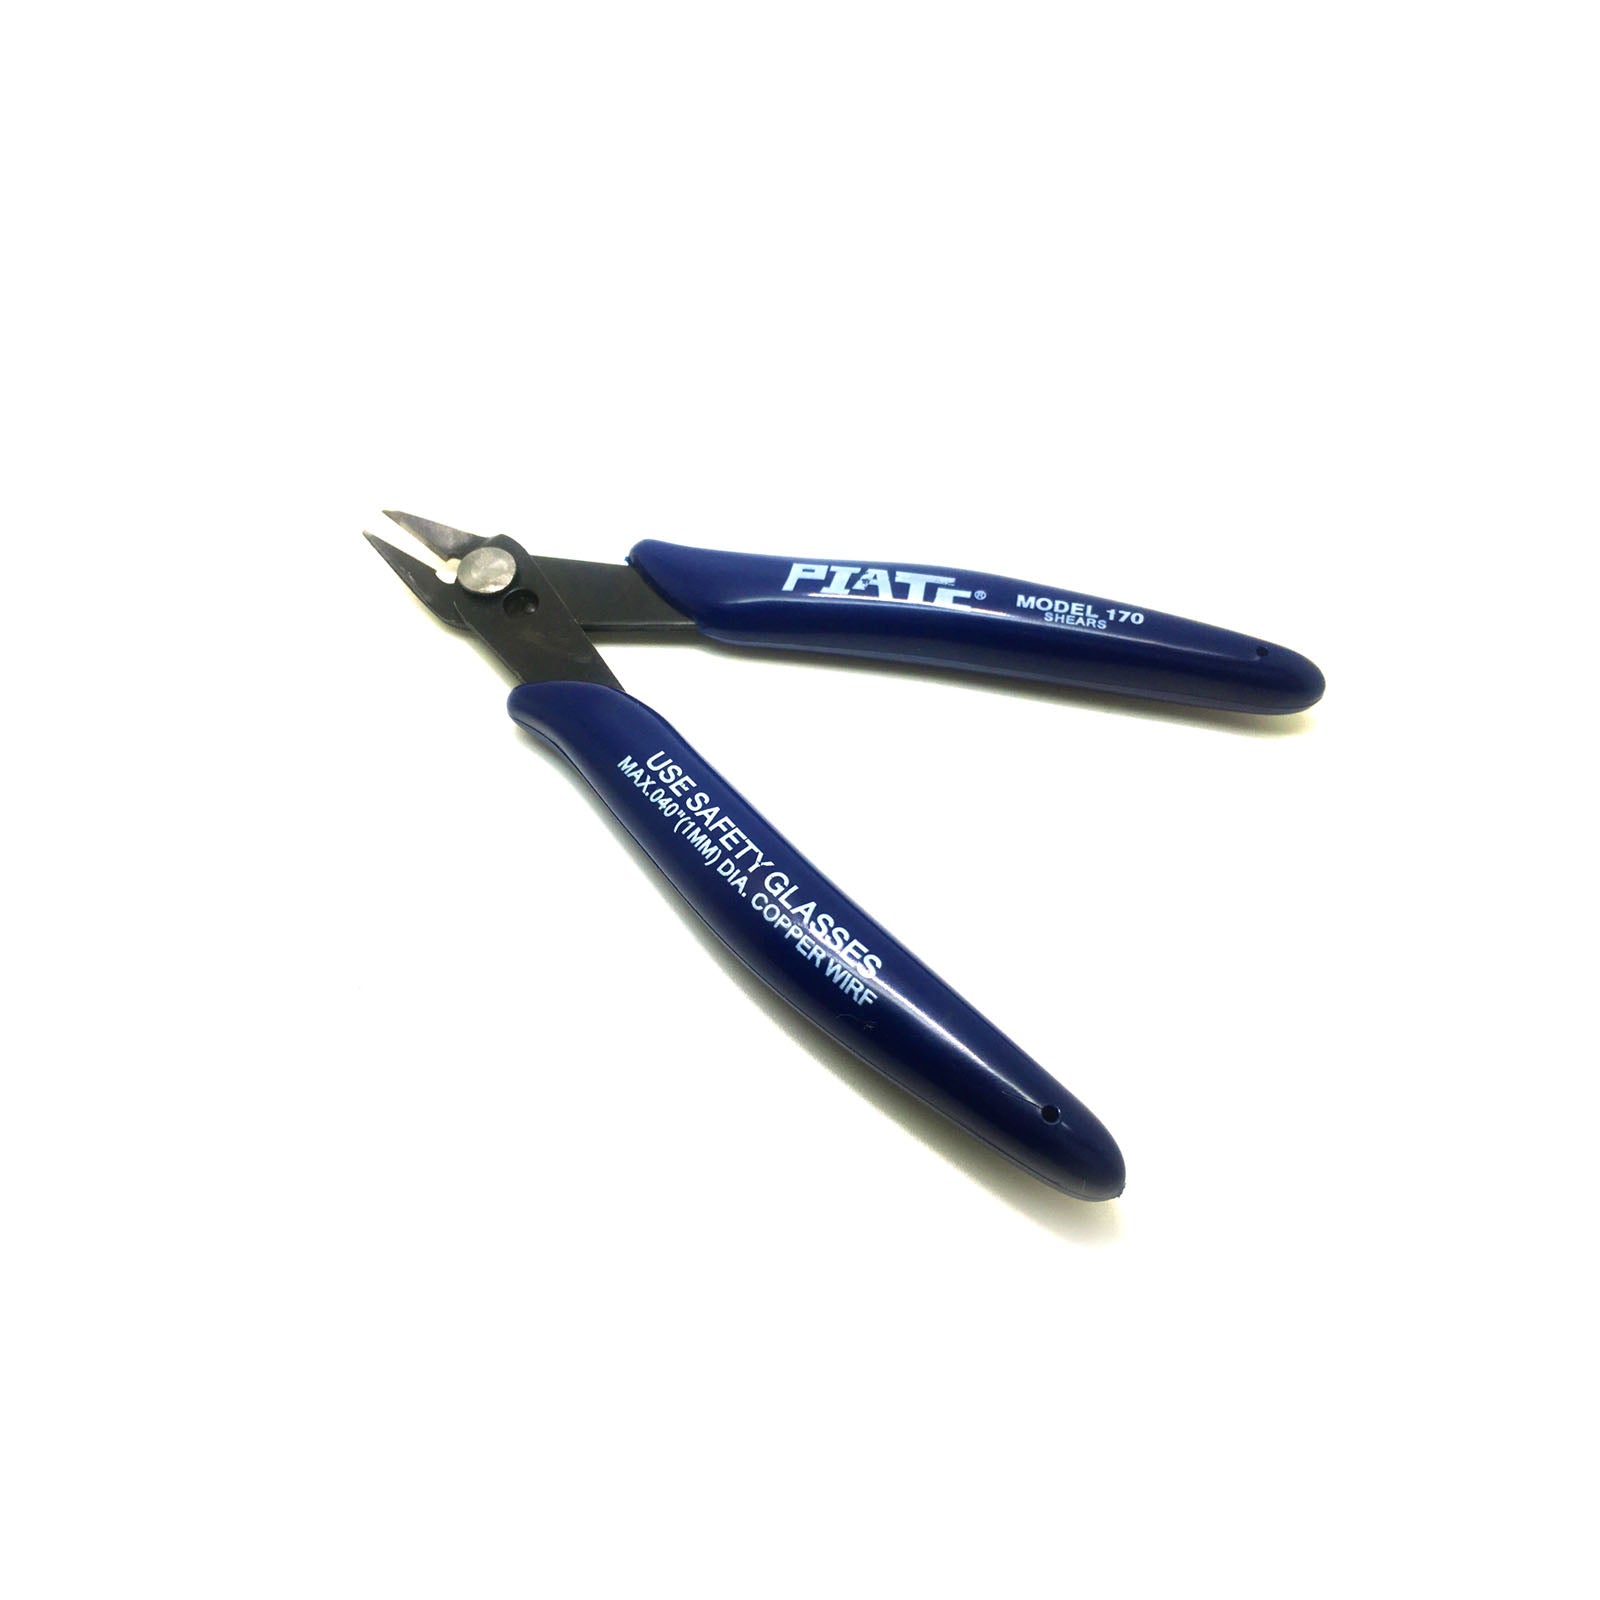 Model for pliers US foreign trade quality pliers 170 pliers [factory direct price] Action Figures